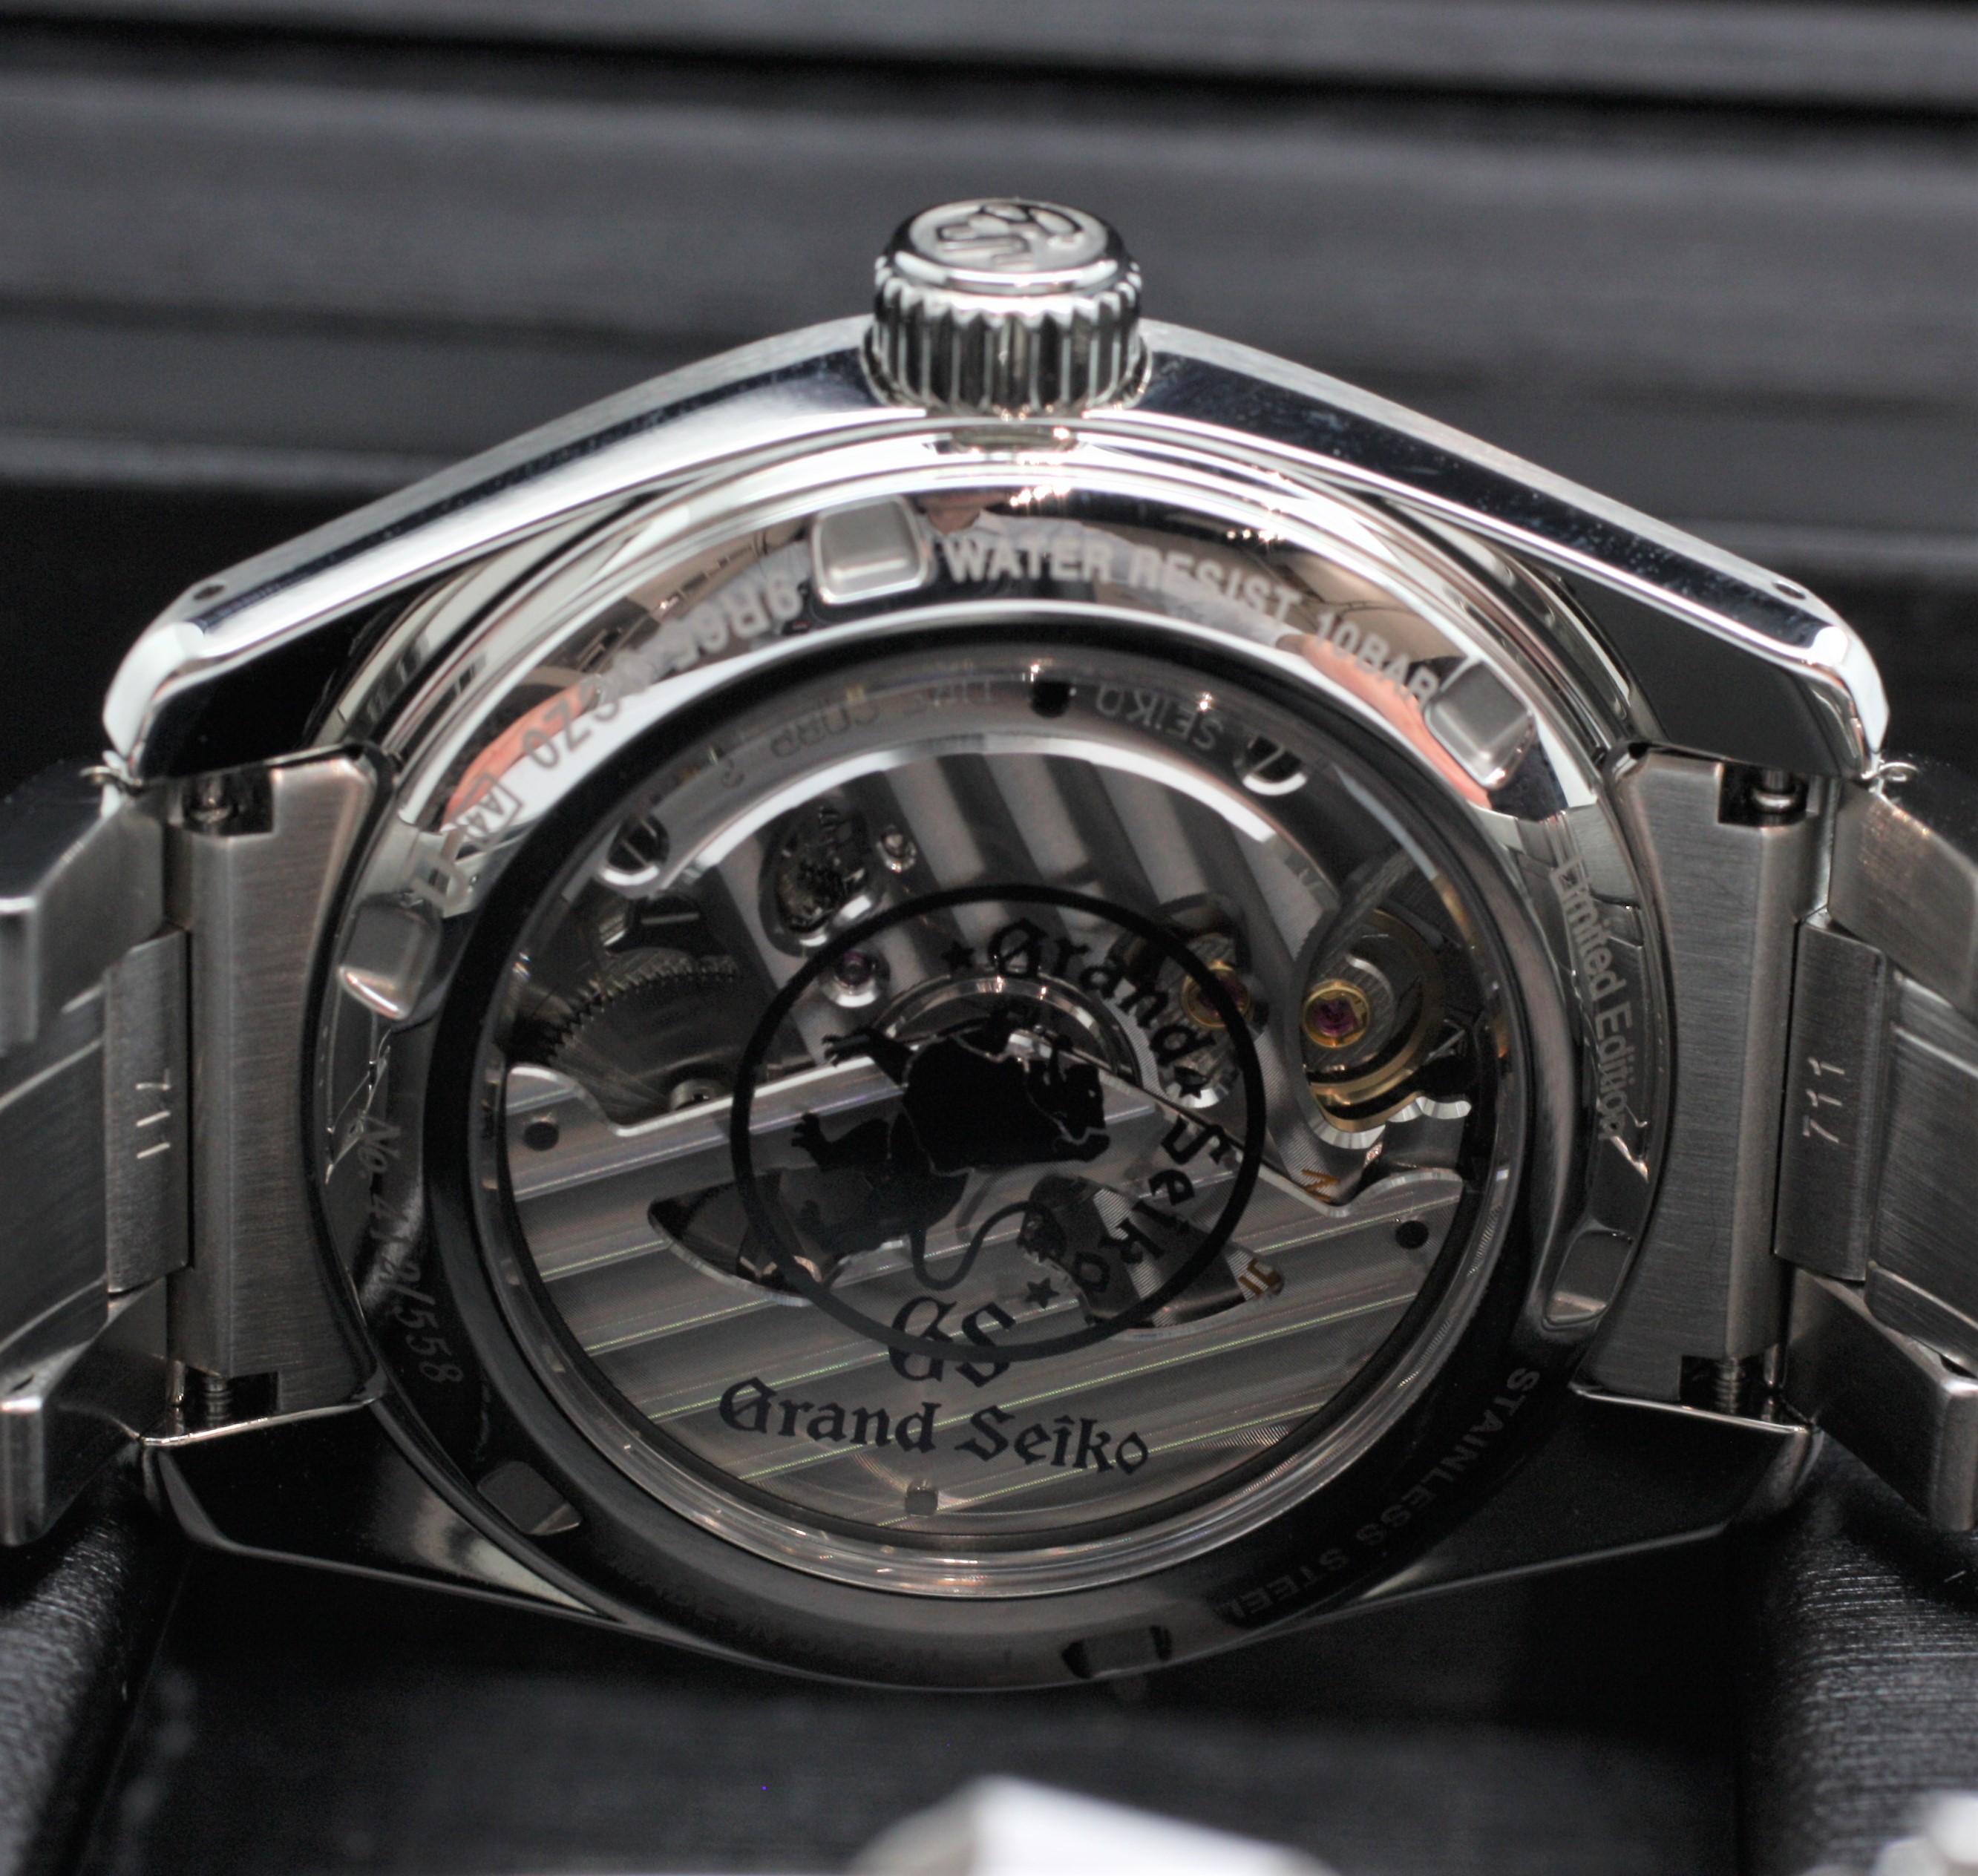 FOR SALE - Pre Owned Grand Seiko SBGA387 US Limited Edition $6500 OBO |  WatchCharts